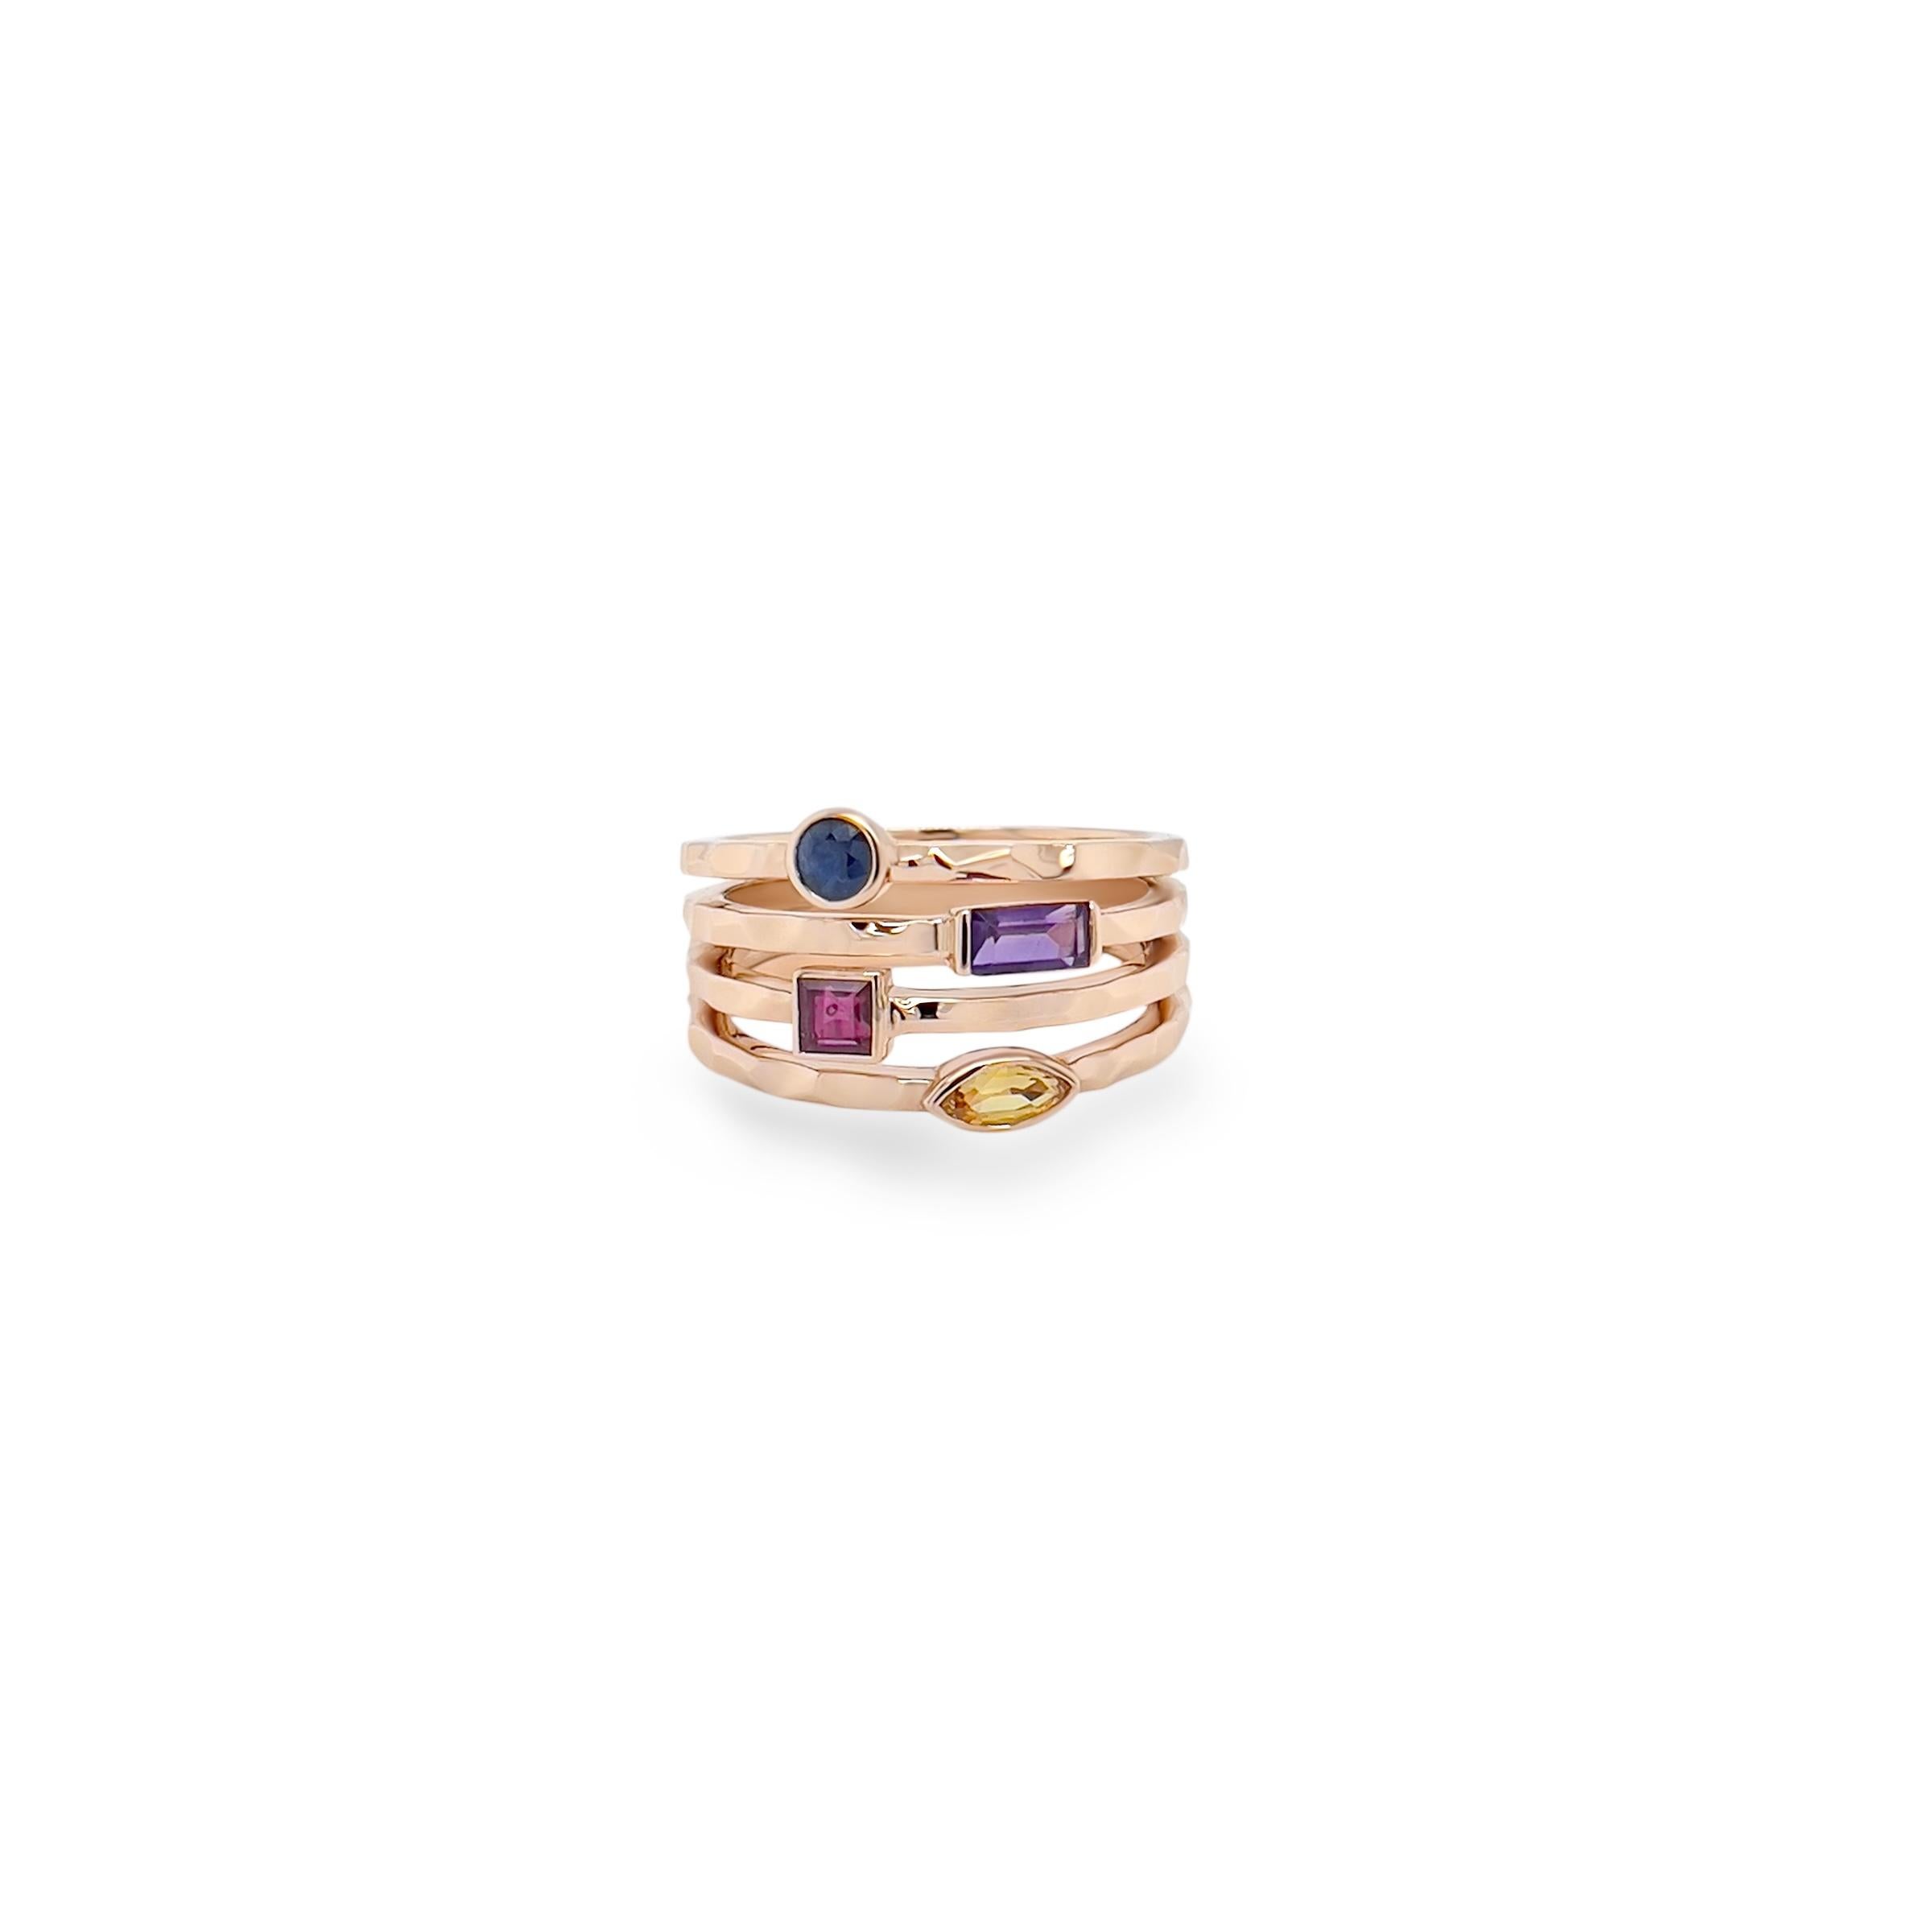 This stunning and luxurious ring has the illusion of a stacking ring. Made out of the finest 18k rose gold and accentuated with mix color and various shaped colored gems. The carefully selected vibrant colored stones can be customized to your